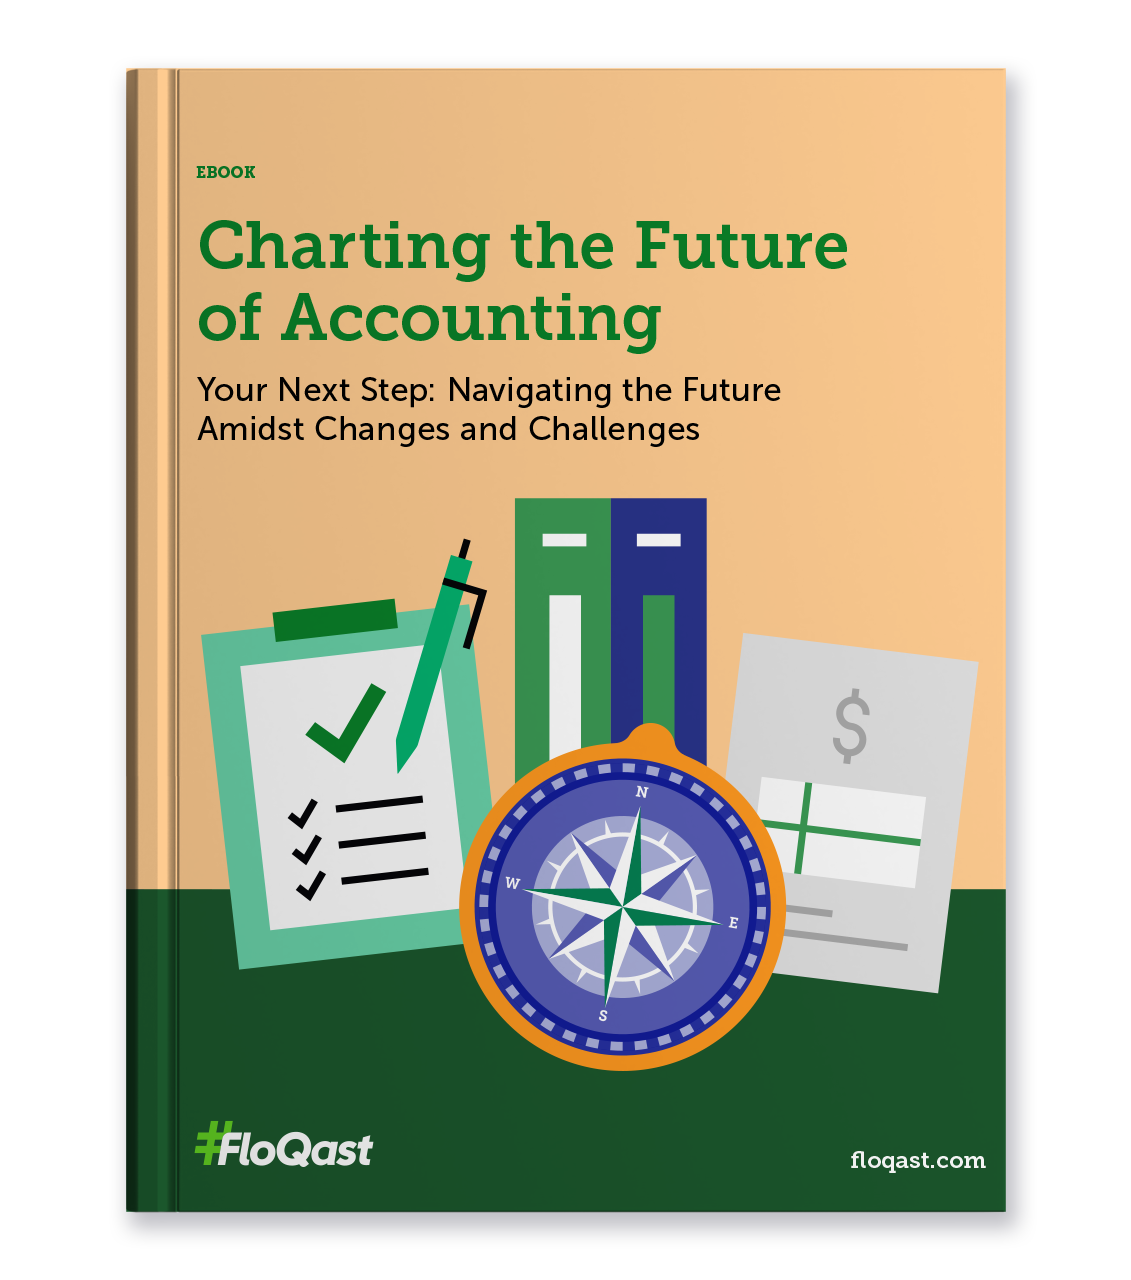 eBook. Charting the Future of Accounting. Your Next Step: Navigating the Future Amidst Changes and Challenges